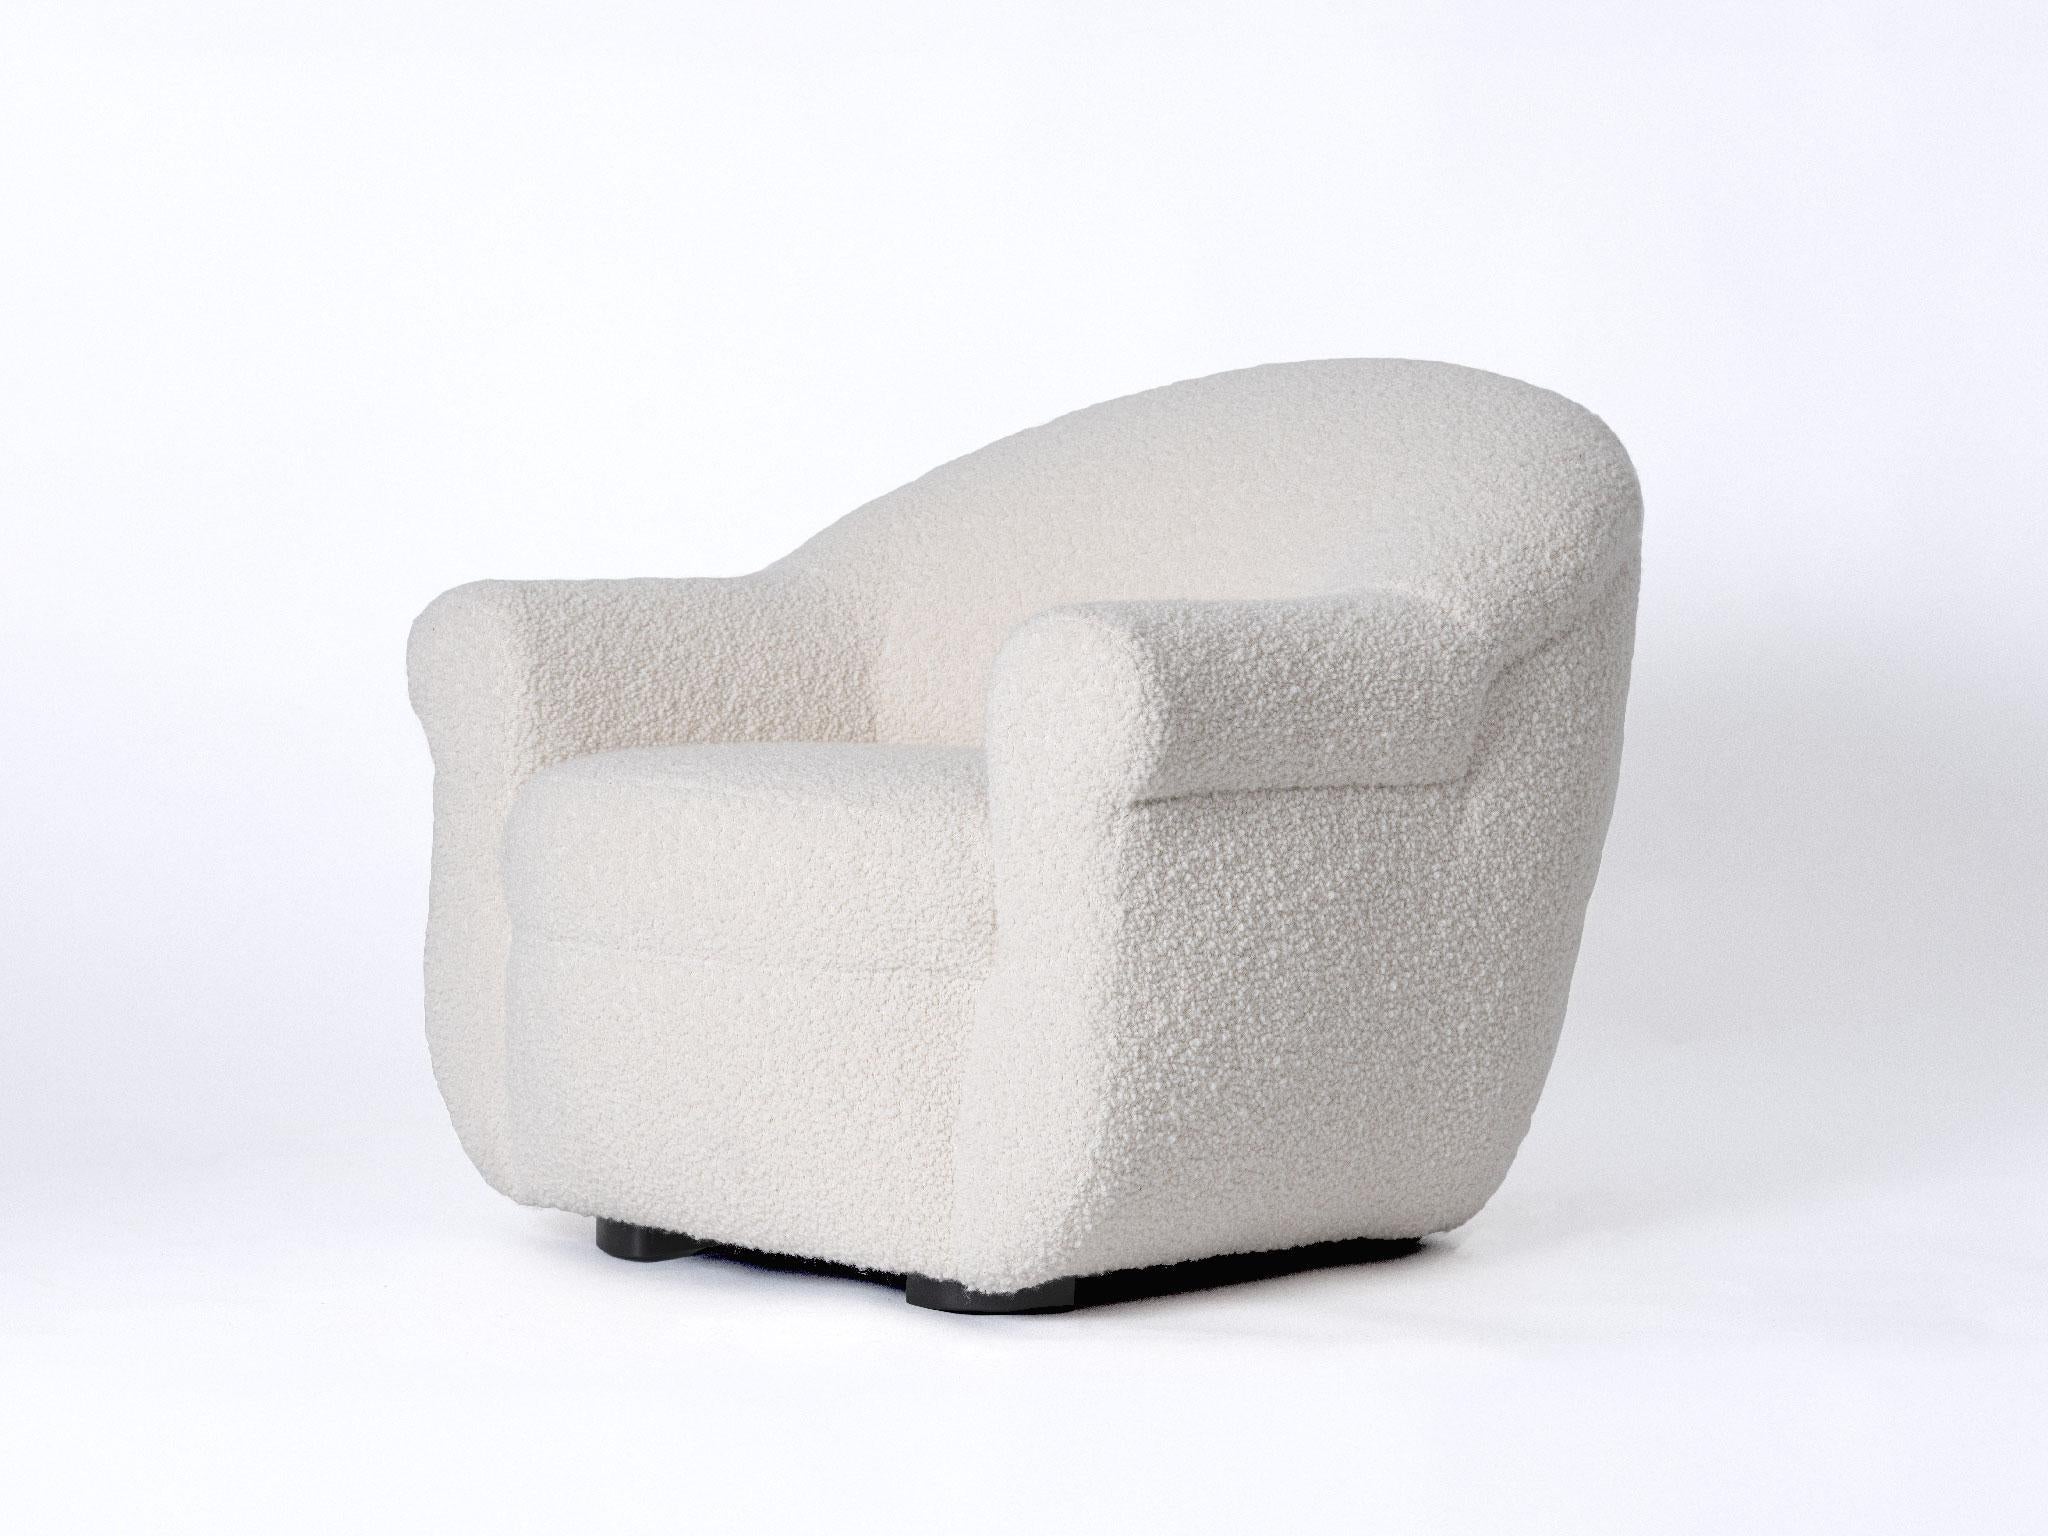 The BERGERE armchair is a timeless and sculptural introduction, distinguished by its graceful lines and welcoming proportions. Plush boucle lends a gentle hand to the low profile of this lounge chair.